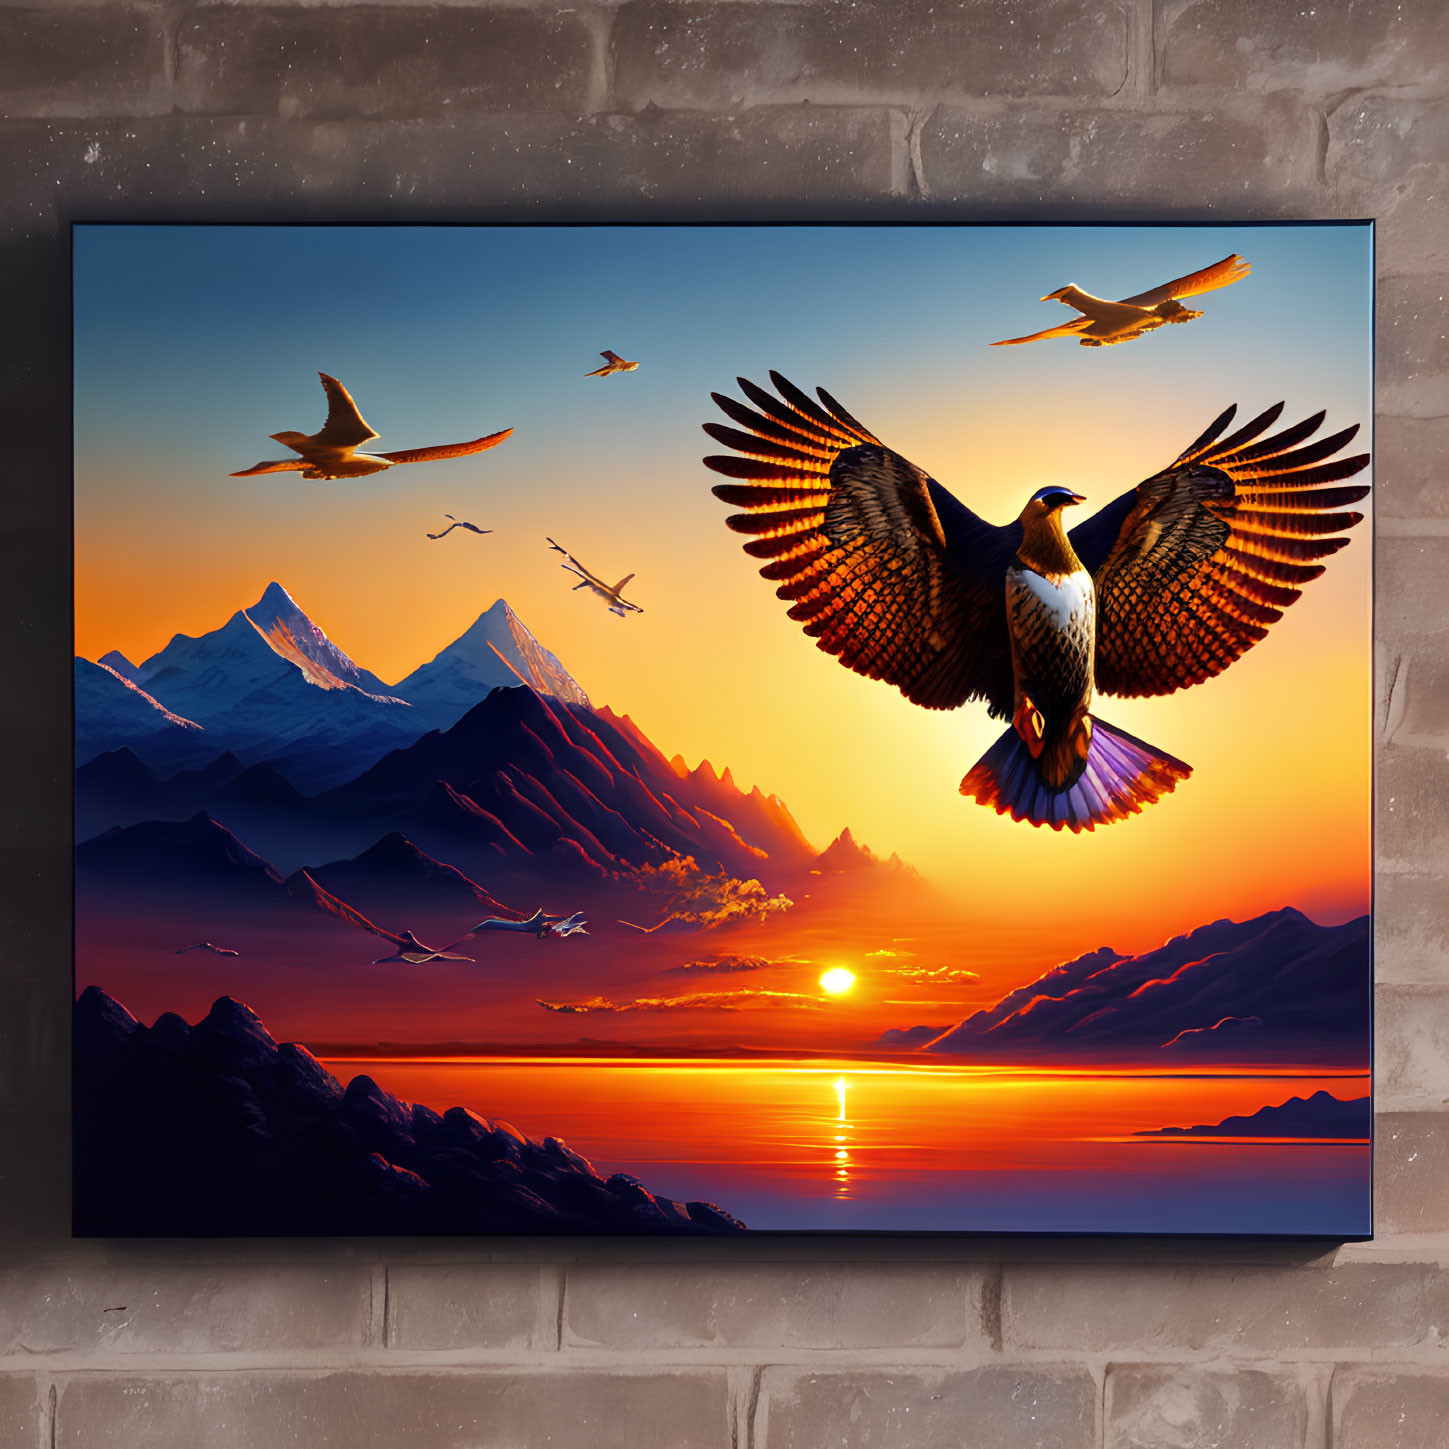 Framed artwork featuring bird soaring at sunset over mountains and sea